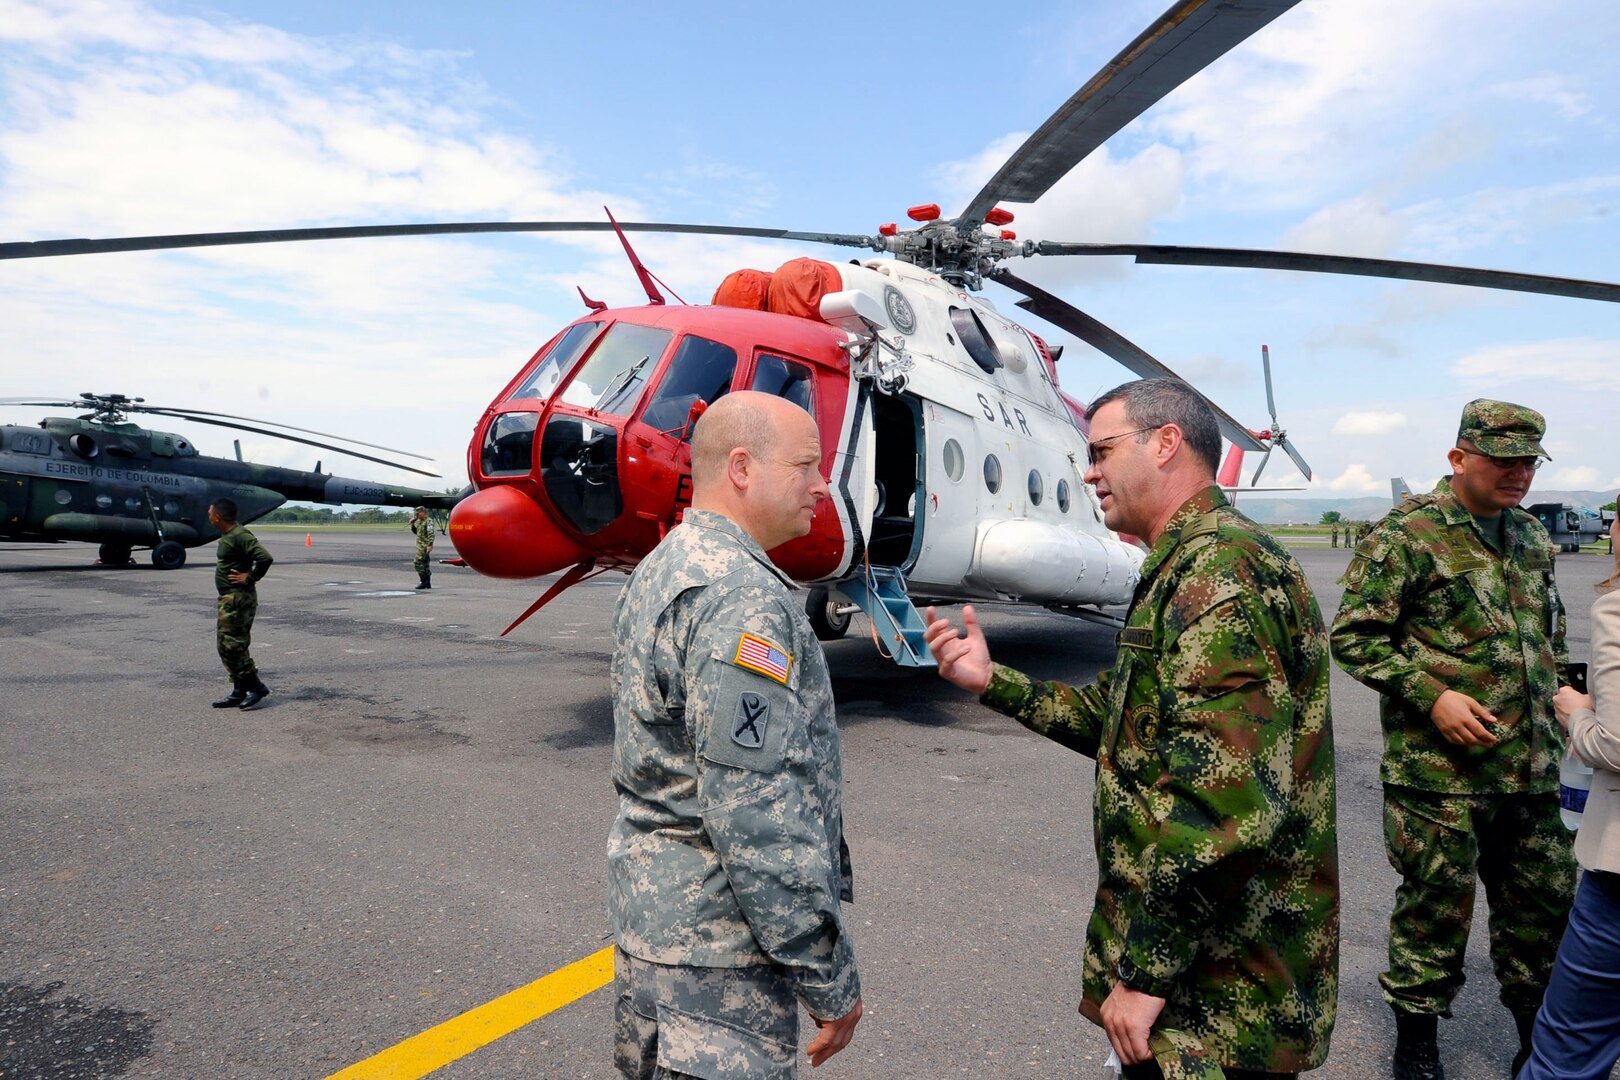 Maj. Gen. Robert E. Livingston, Jr., the adjutant general of South Carolina, speaks with Colombian Army Maj. Gen. Jorge Salgado, army planning and transformation, in front of a Colombian army Mi-17 search and rescue helicopter, in Tolemaida, Colombia, Feb. 21, 2013.